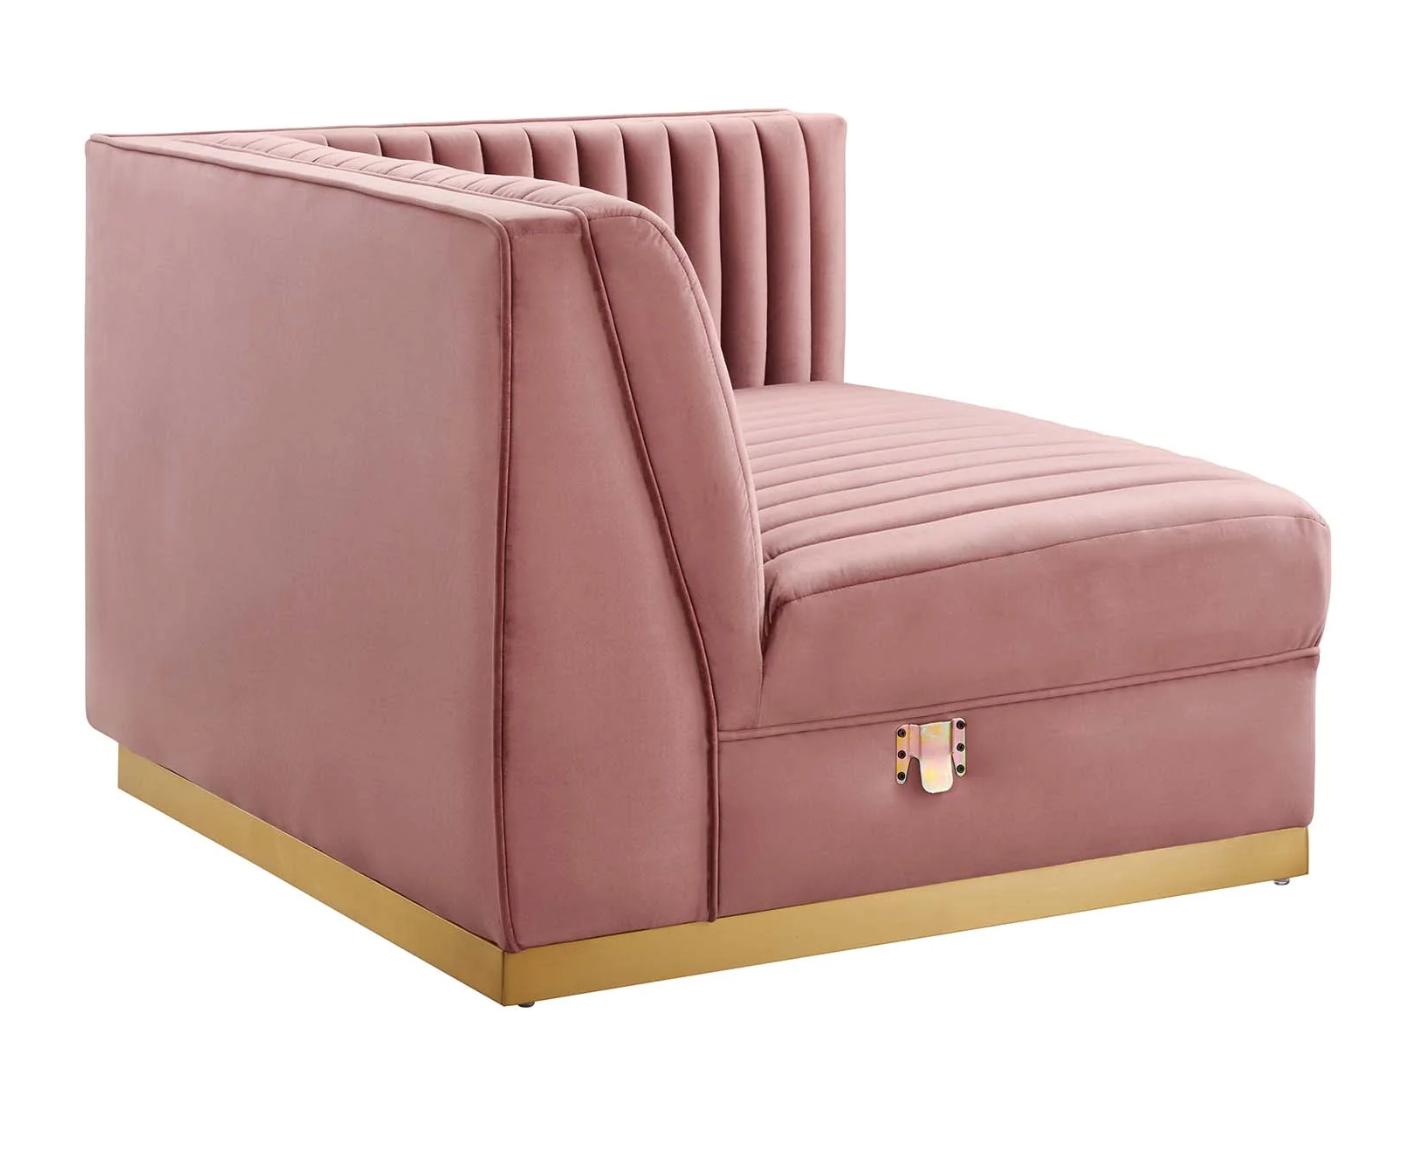 Channel Tufted Blush Pink Velvet Sectional 4-Piece Sofa